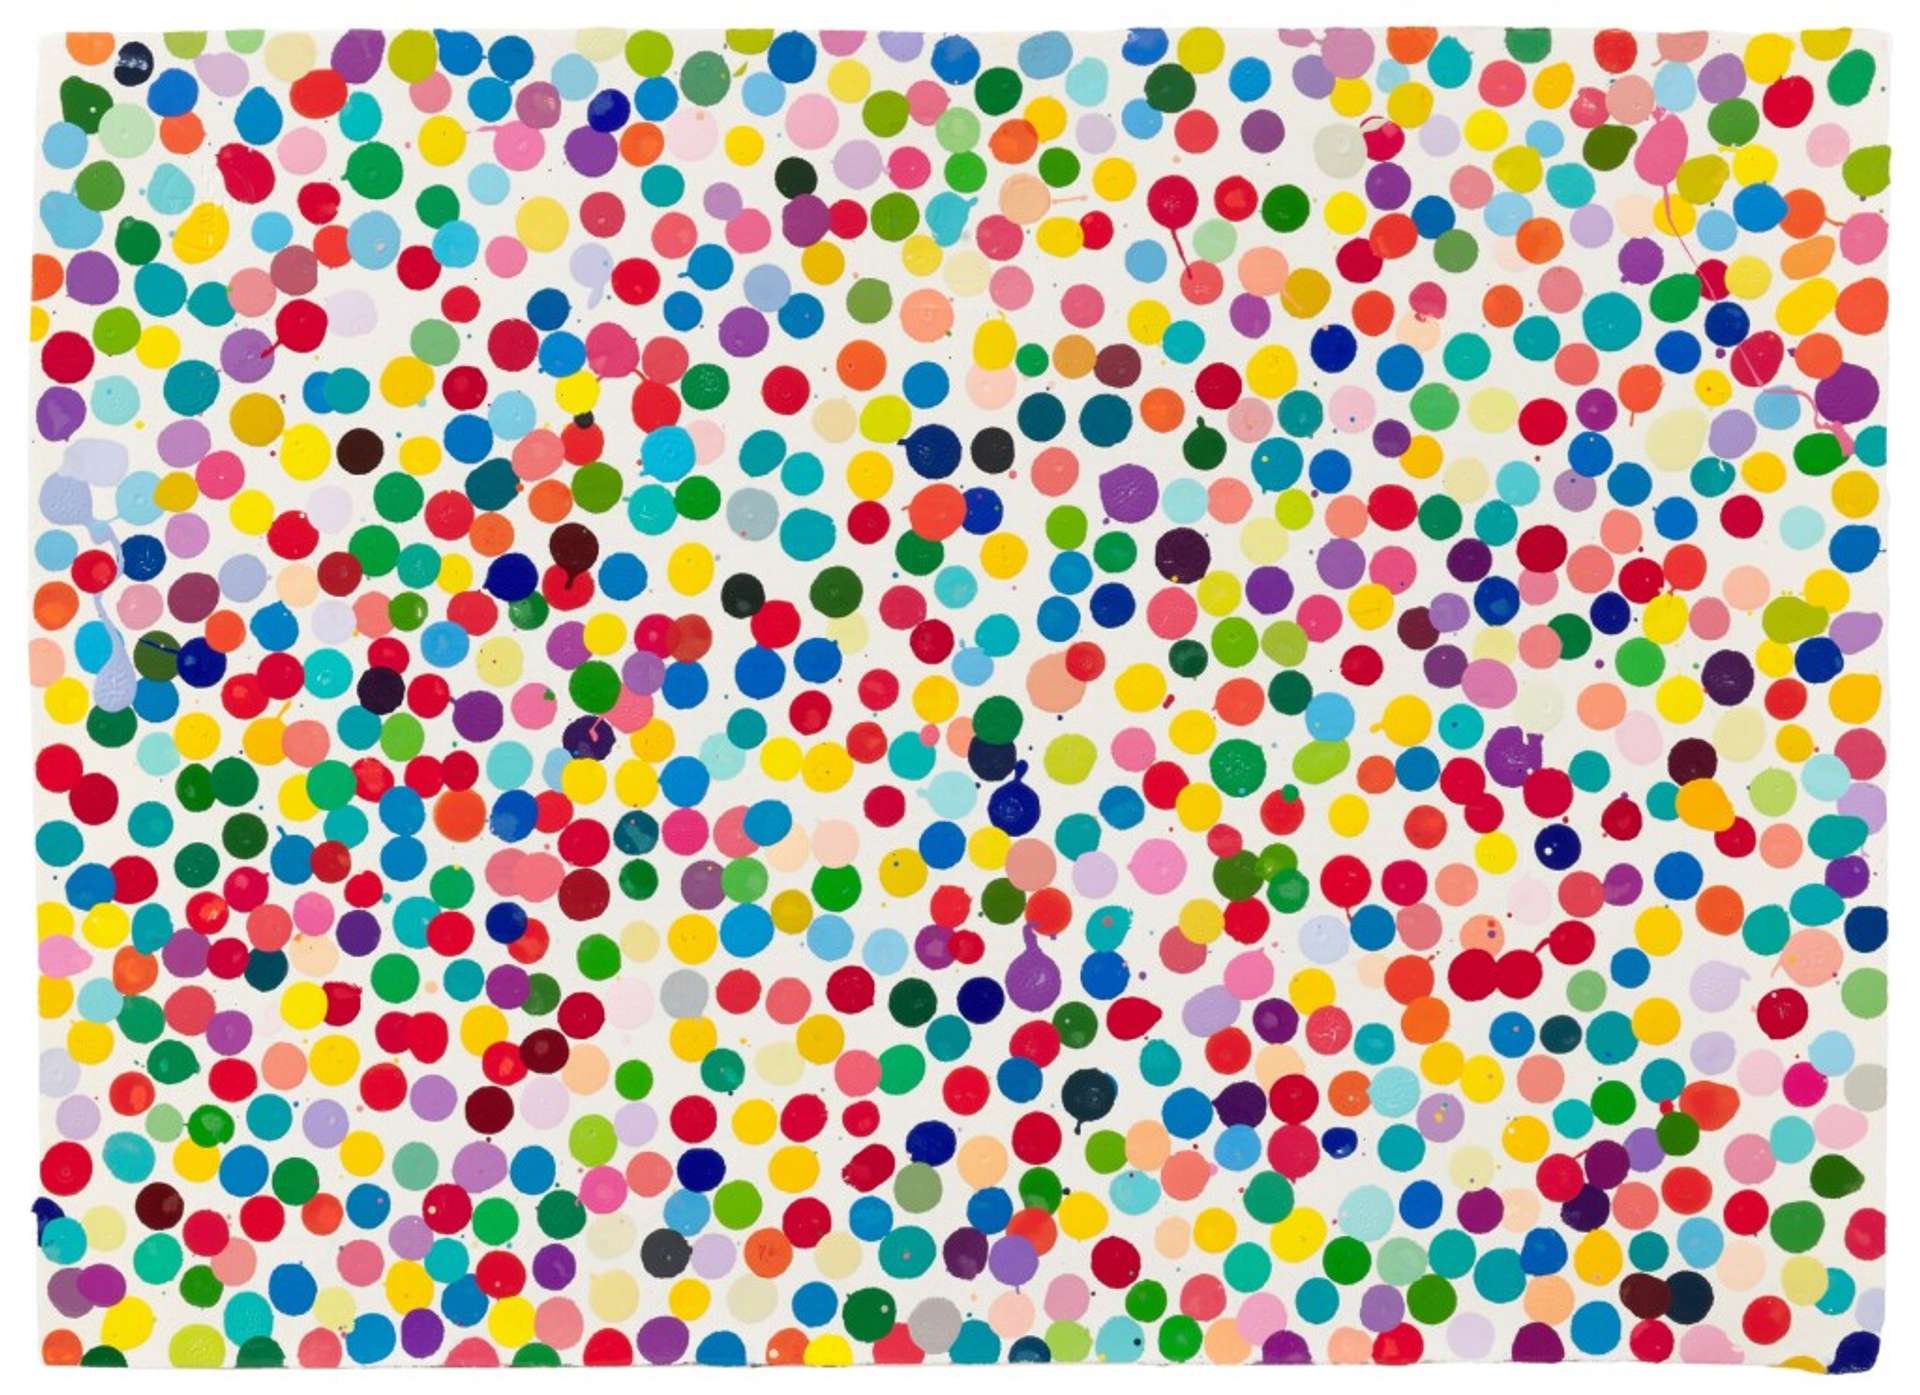 You Don't Have To Say It Today by Damien Hirst